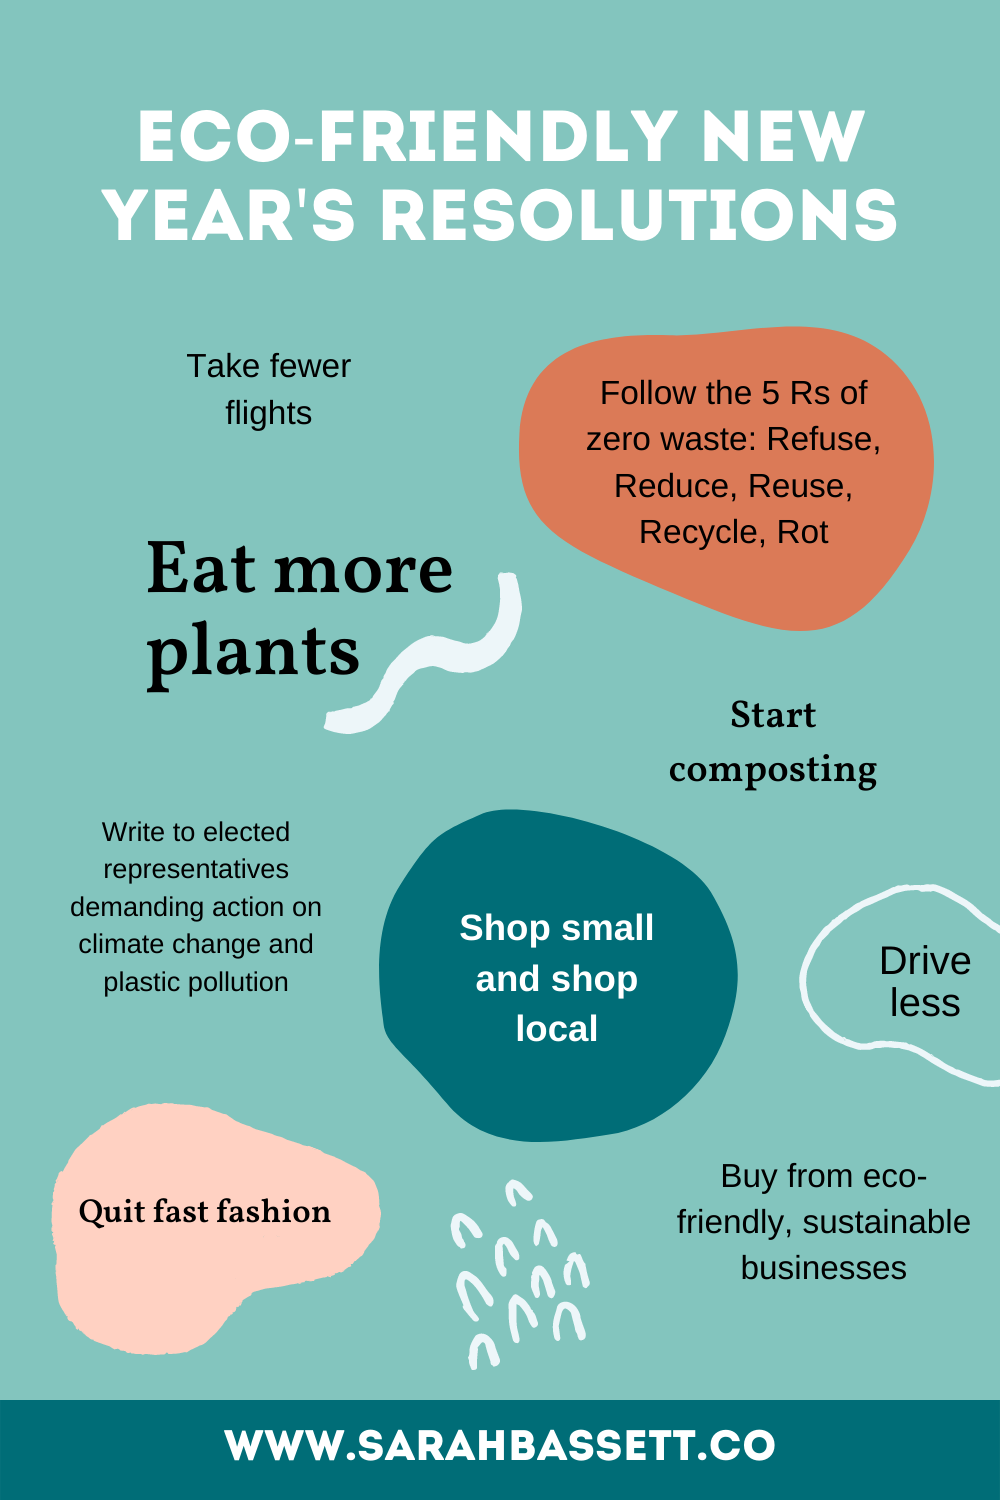 Eco-friendly New Year's Resolutions. How to live more zero waste, plastic-free, low impact and non-toxic. 

Personal development: living a more eco friendly lifestlye is easier than think. Try taking small sustainable steps to an environmentally-friendly lifestyle. 